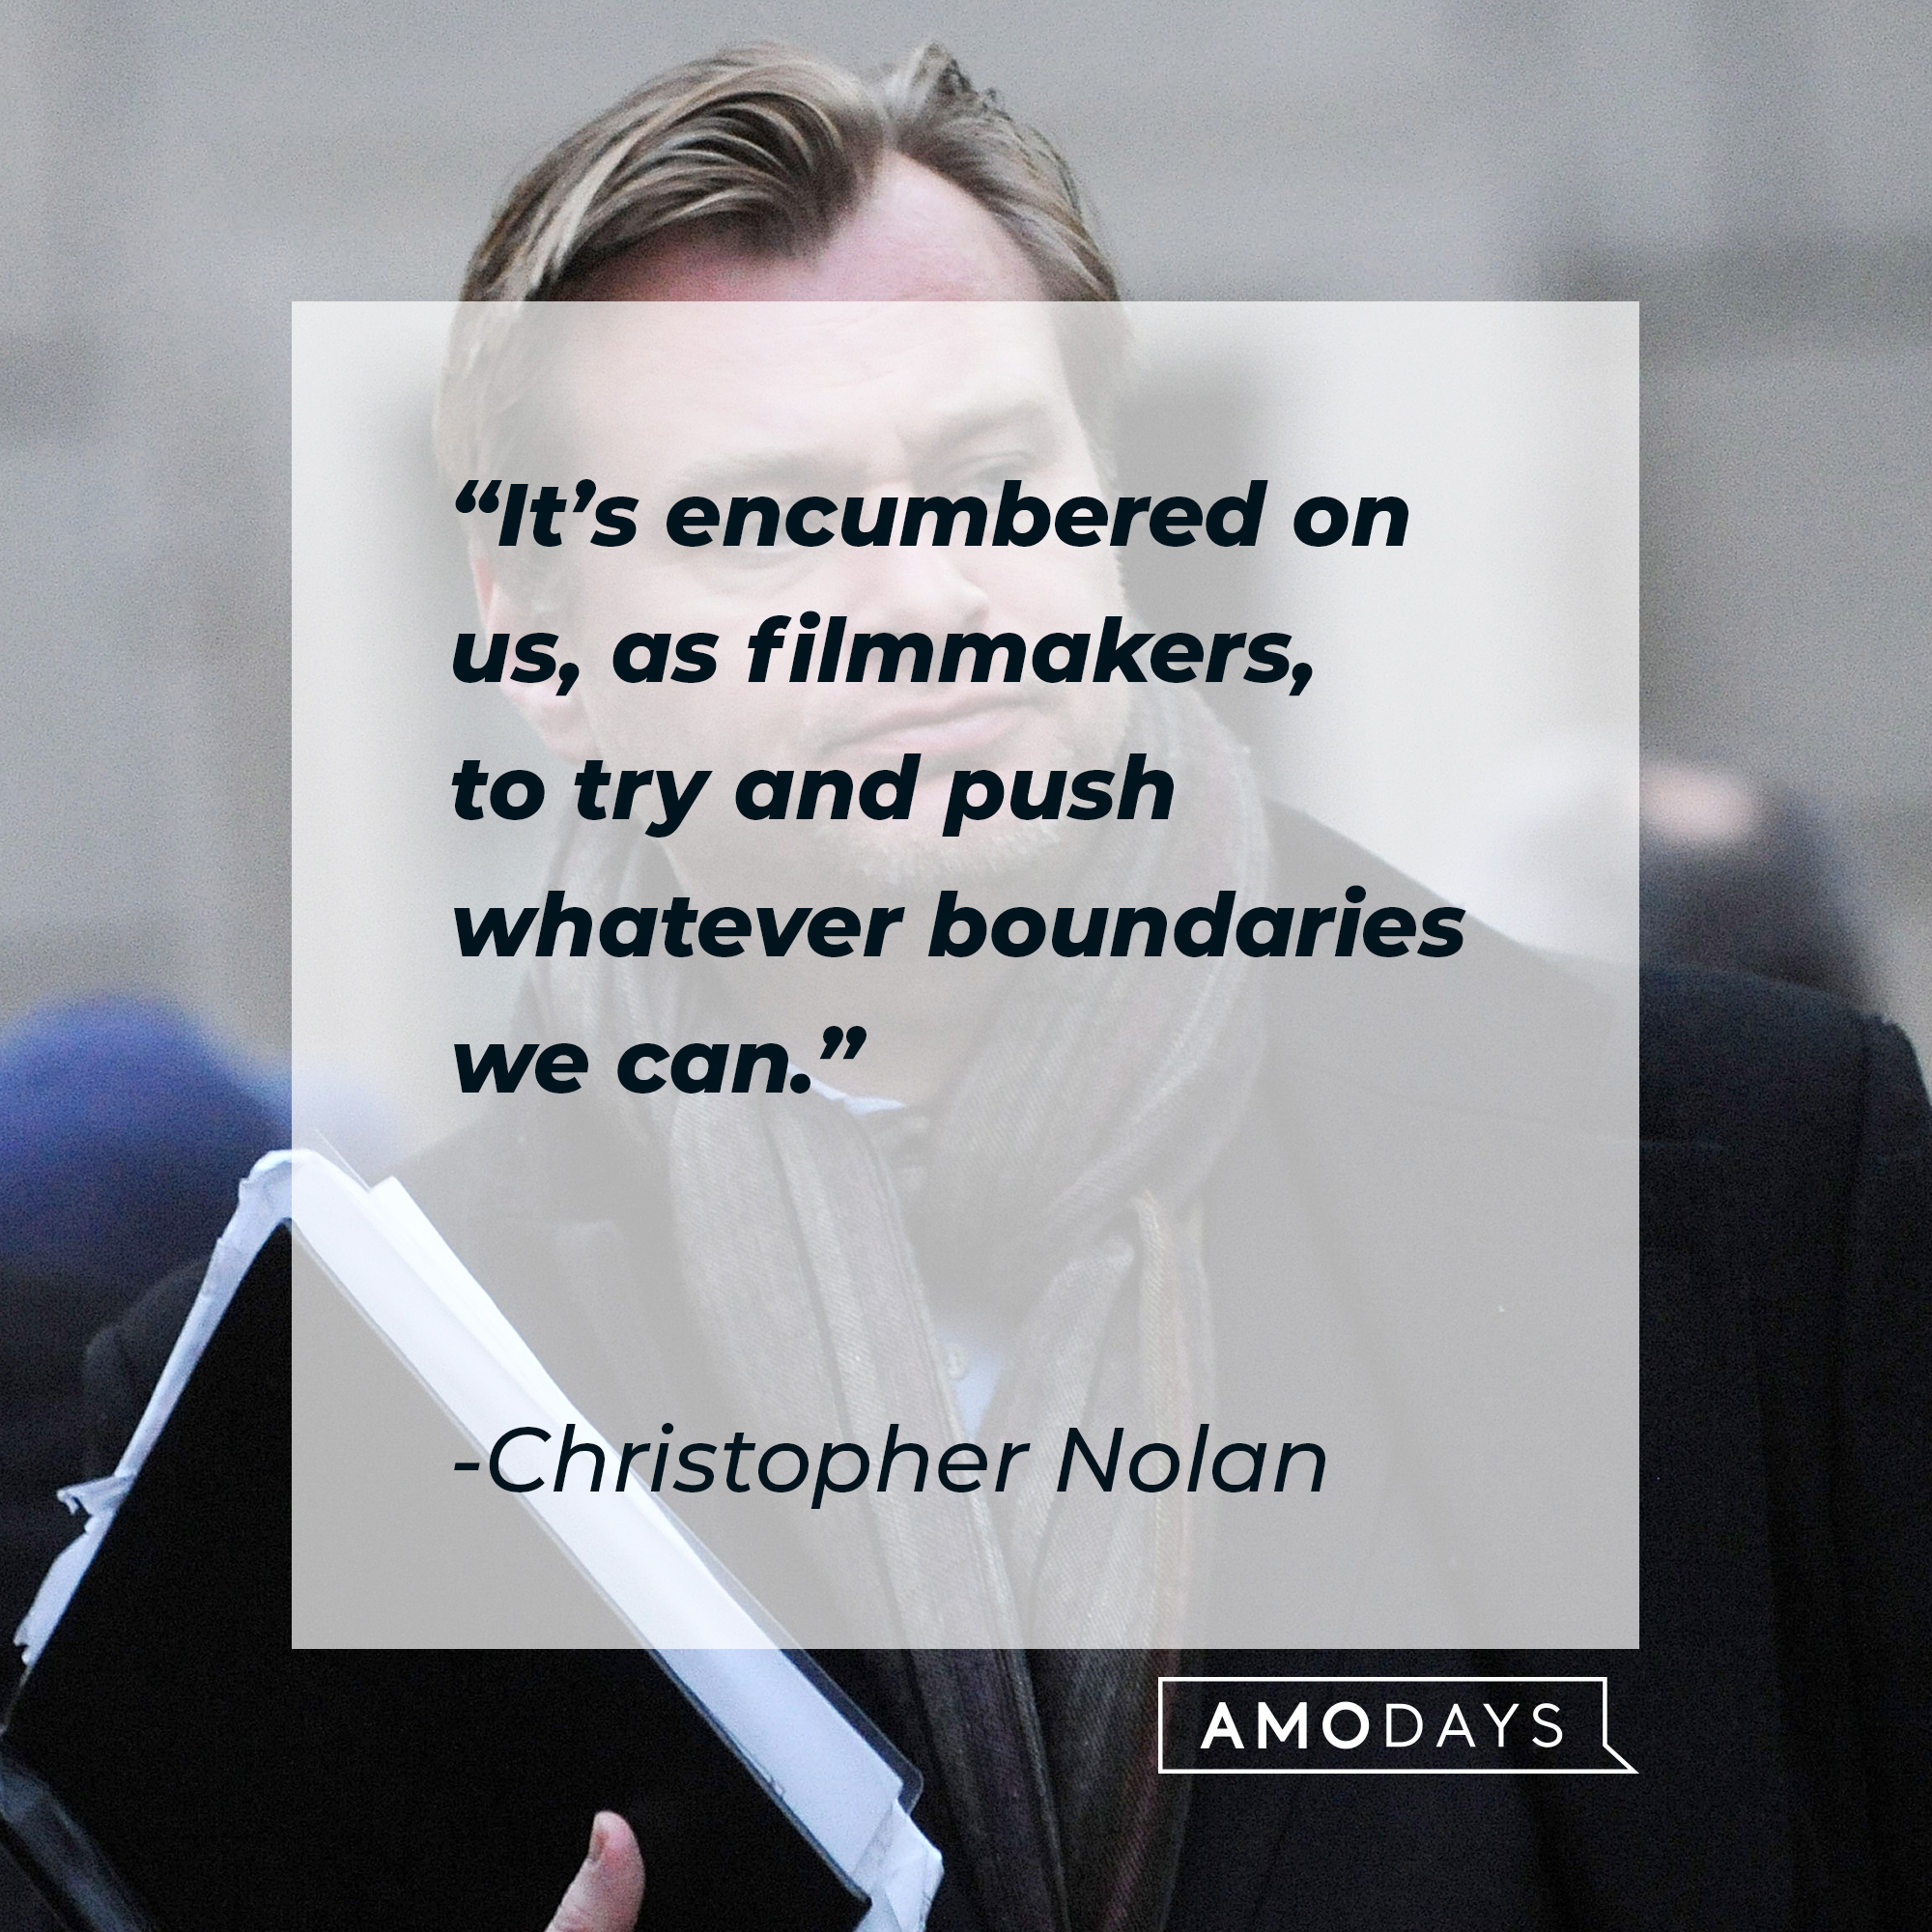 Christopher Nolan, with his quote: “It’s encumbered on us, as filmmakers, to try and push whatever boundaries we can.”   | Source: Getty Images